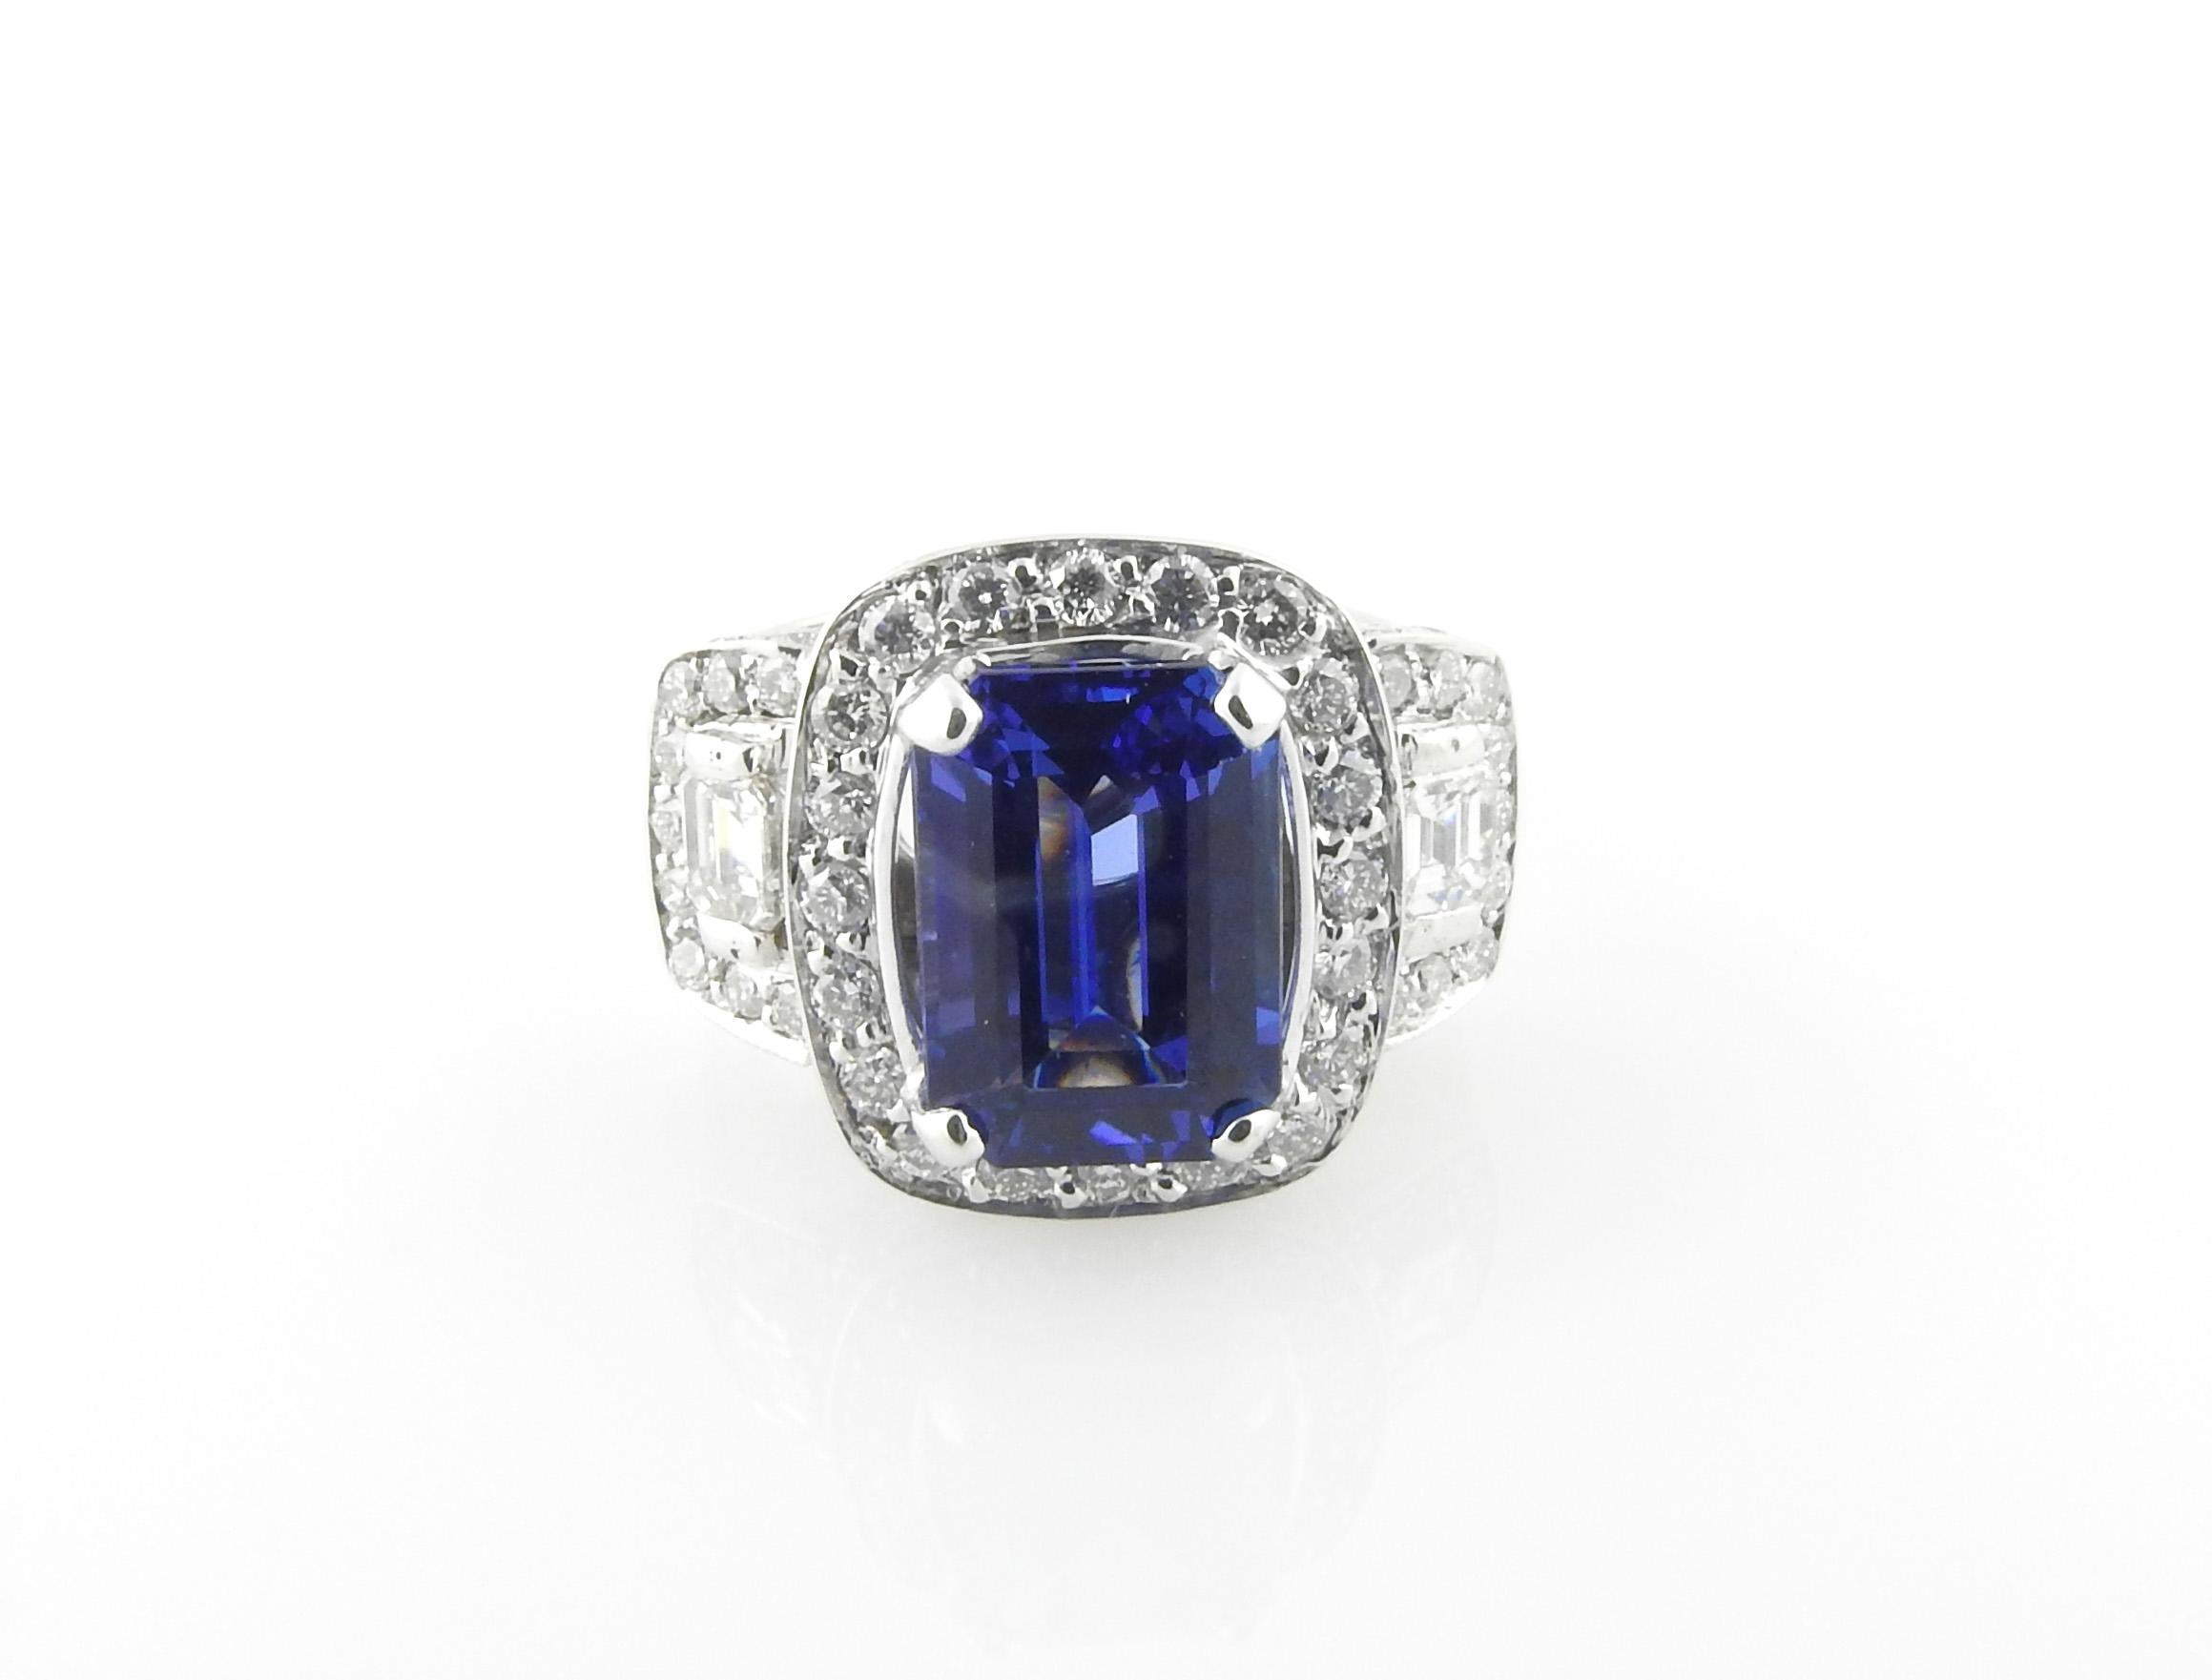 GAI certified 18K White Gold Genuine Tanzanite and Diamond Ring

This statement piece is set in white gold and has a genuine emerald cut blue tanzanite stone measuring at 4.14ct, with a AAA clarity grade.

The stunning tanzanite is blue with purple